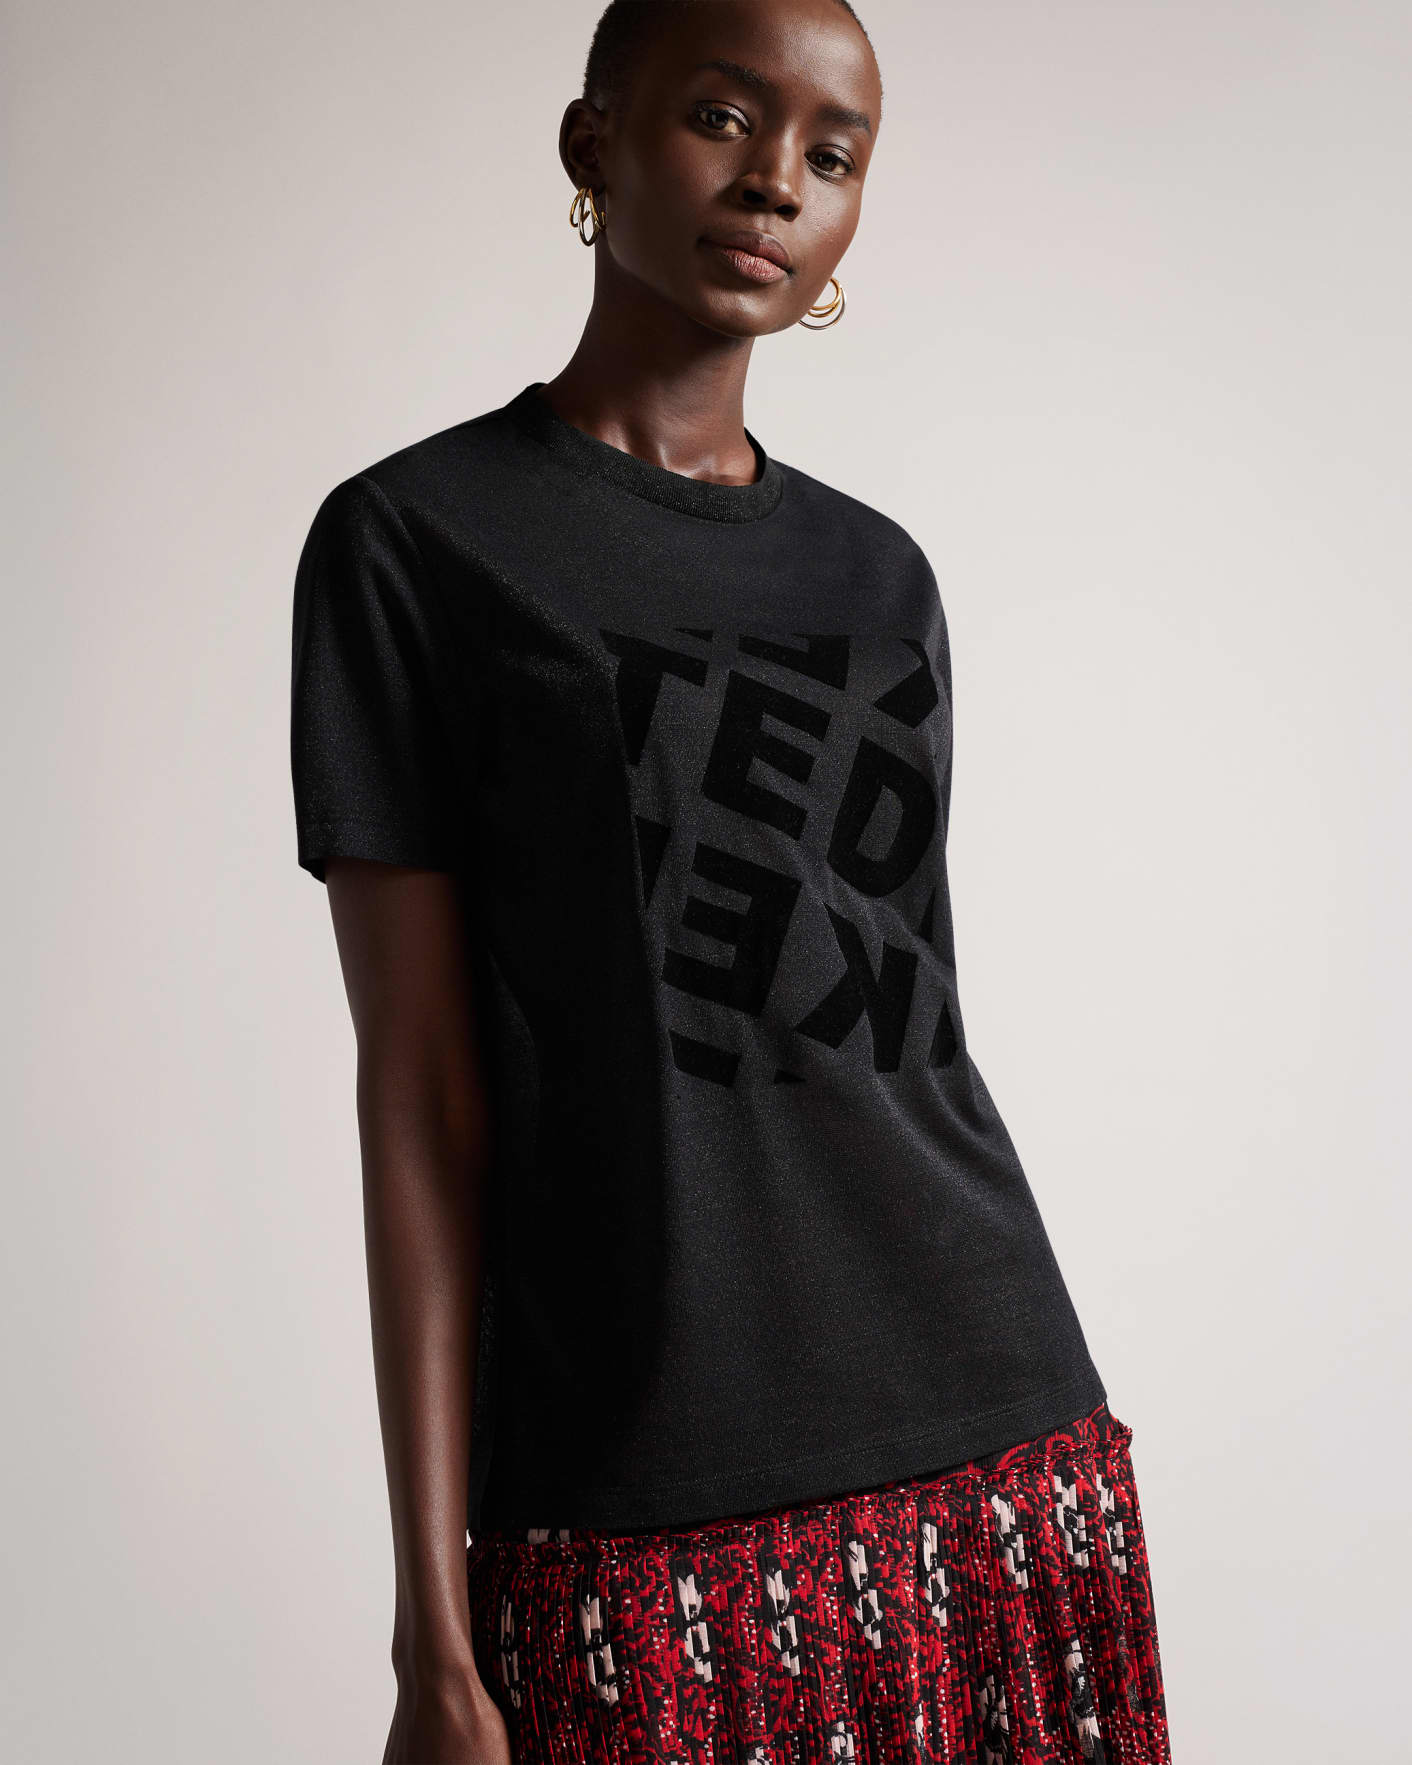 Black Graphic Tee Ted Baker